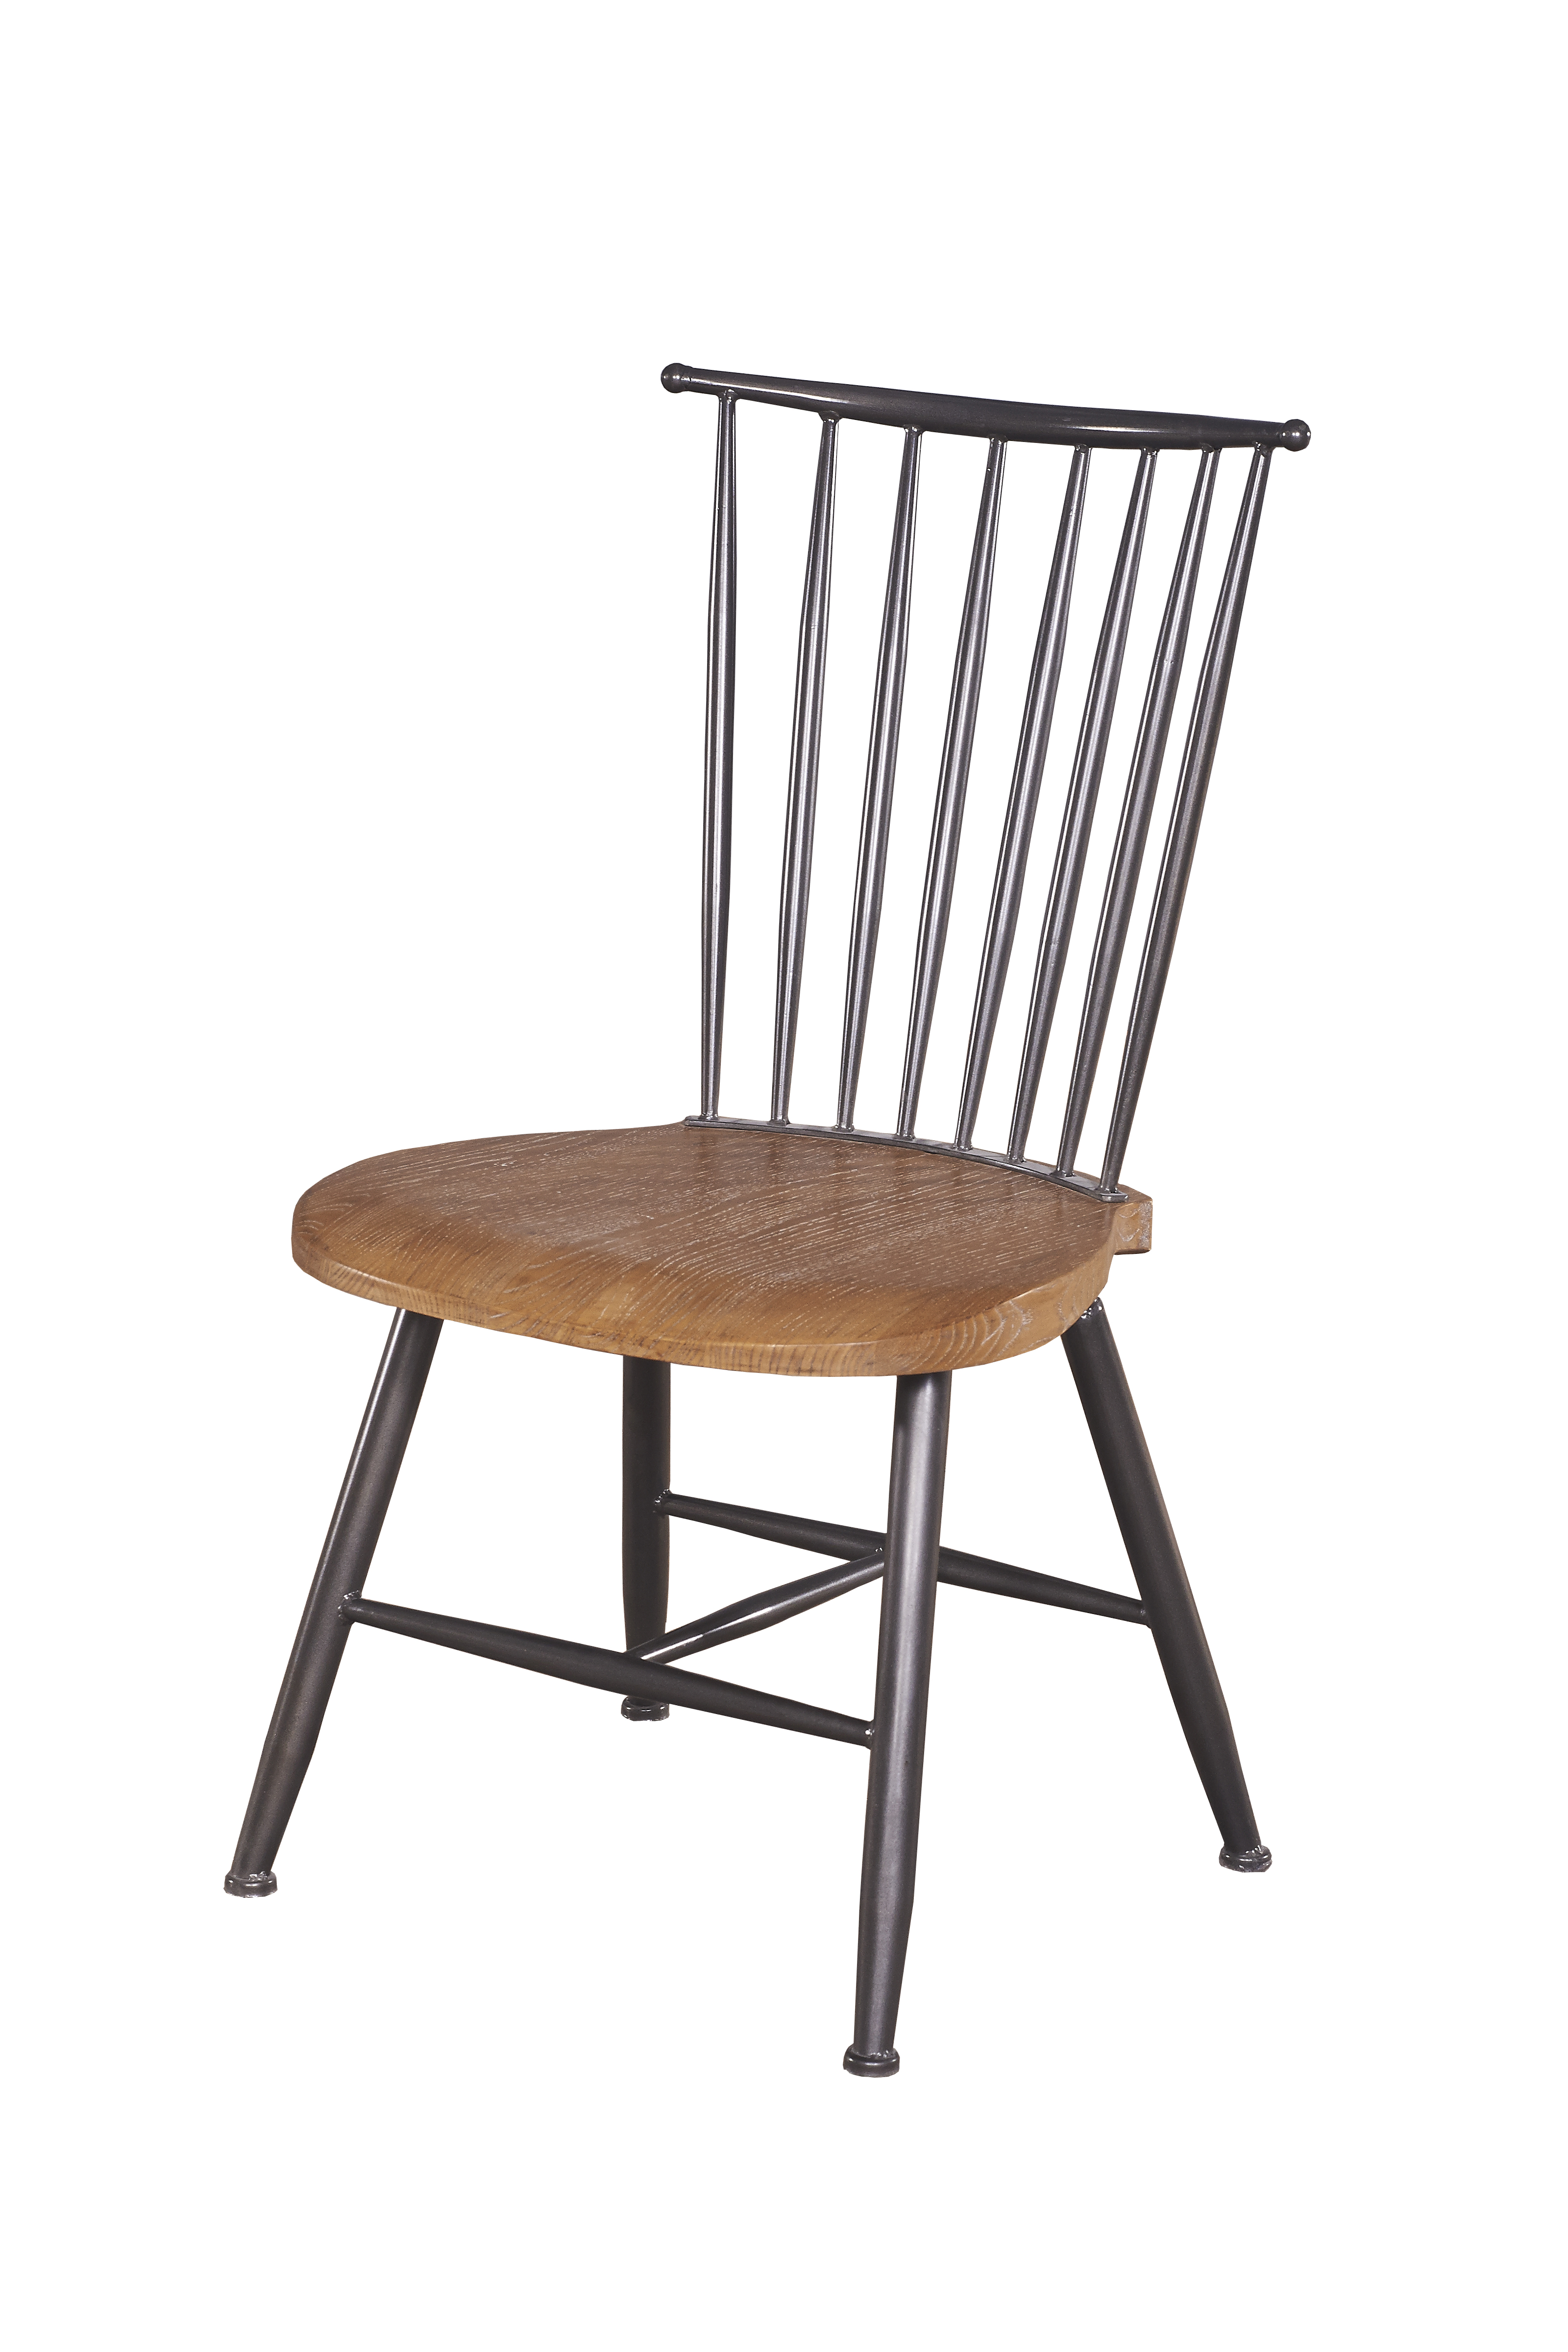 MS386-01-Wrought iron chair